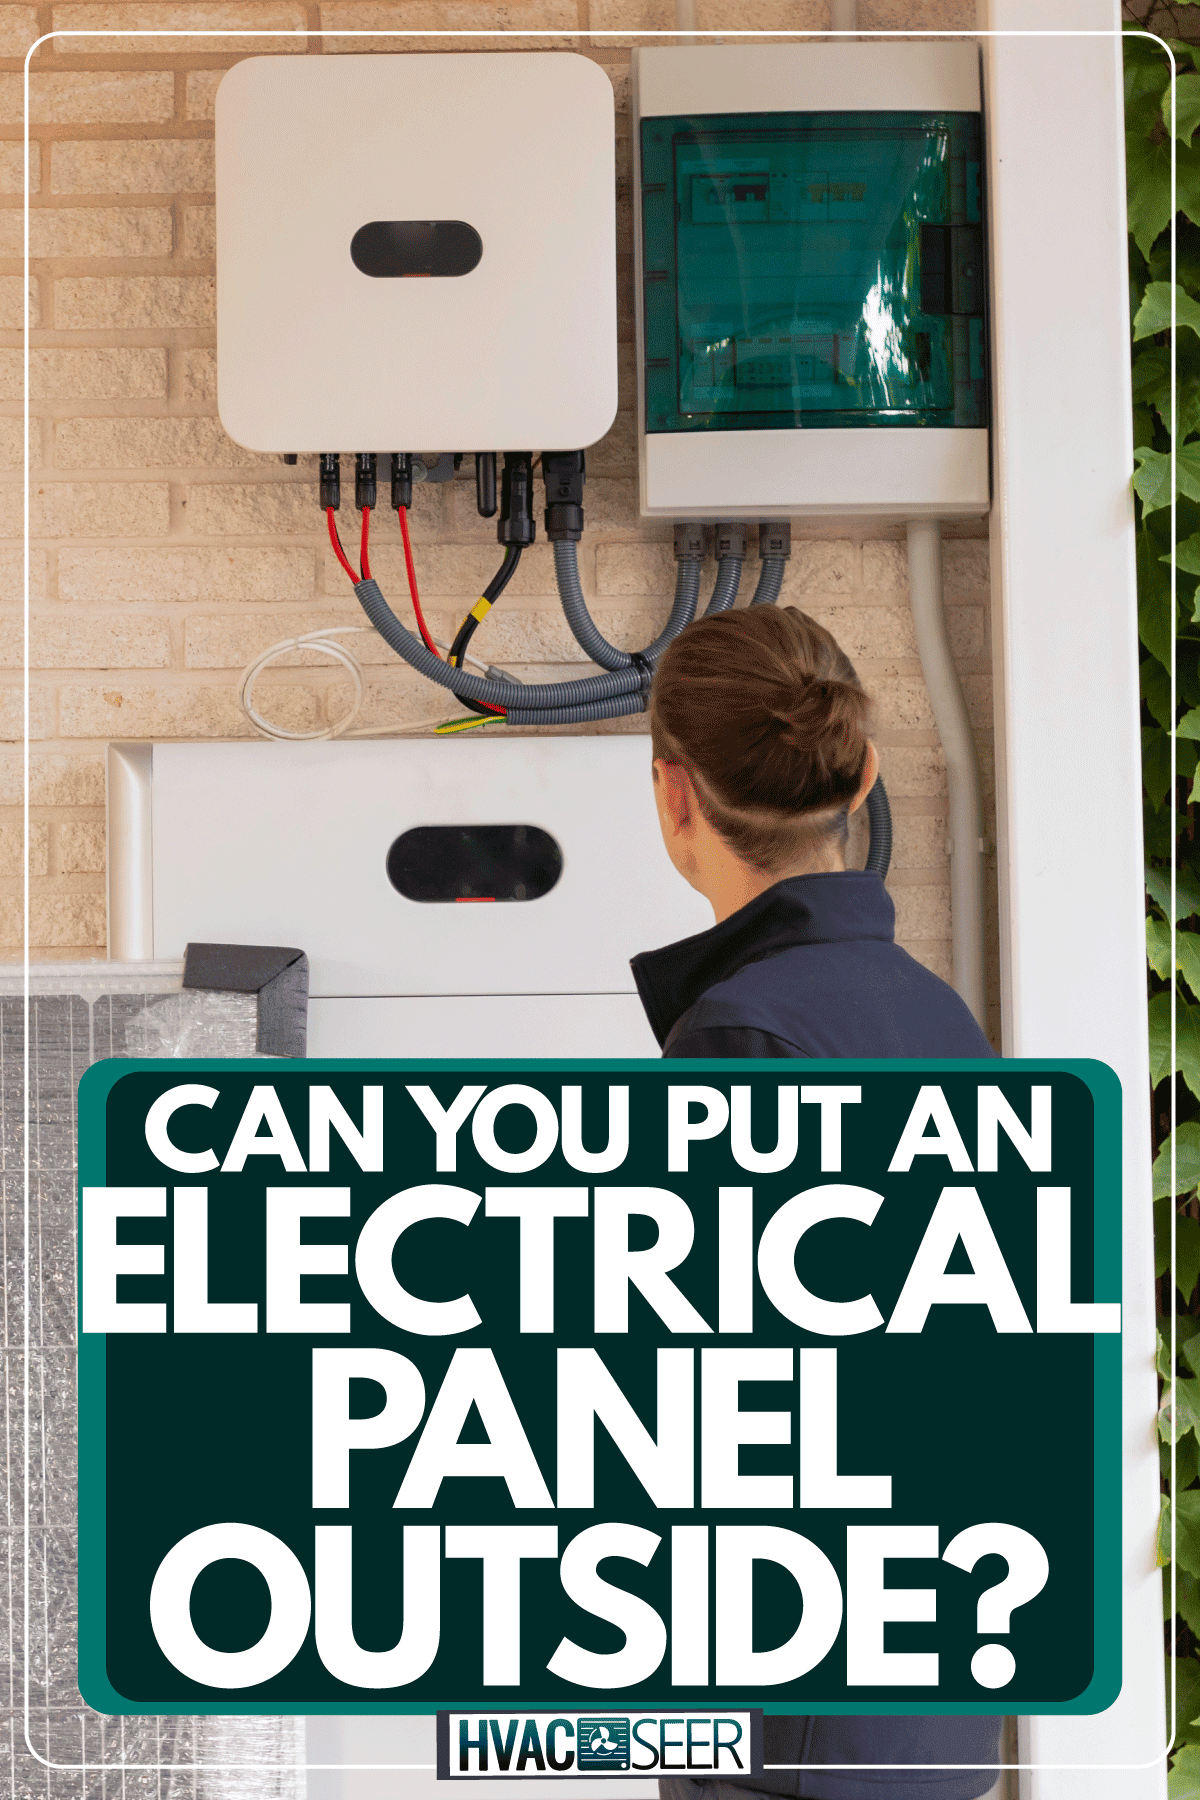 Electrician checking the electrical panel of the house, Can You Put An Electrical Panel Outside?